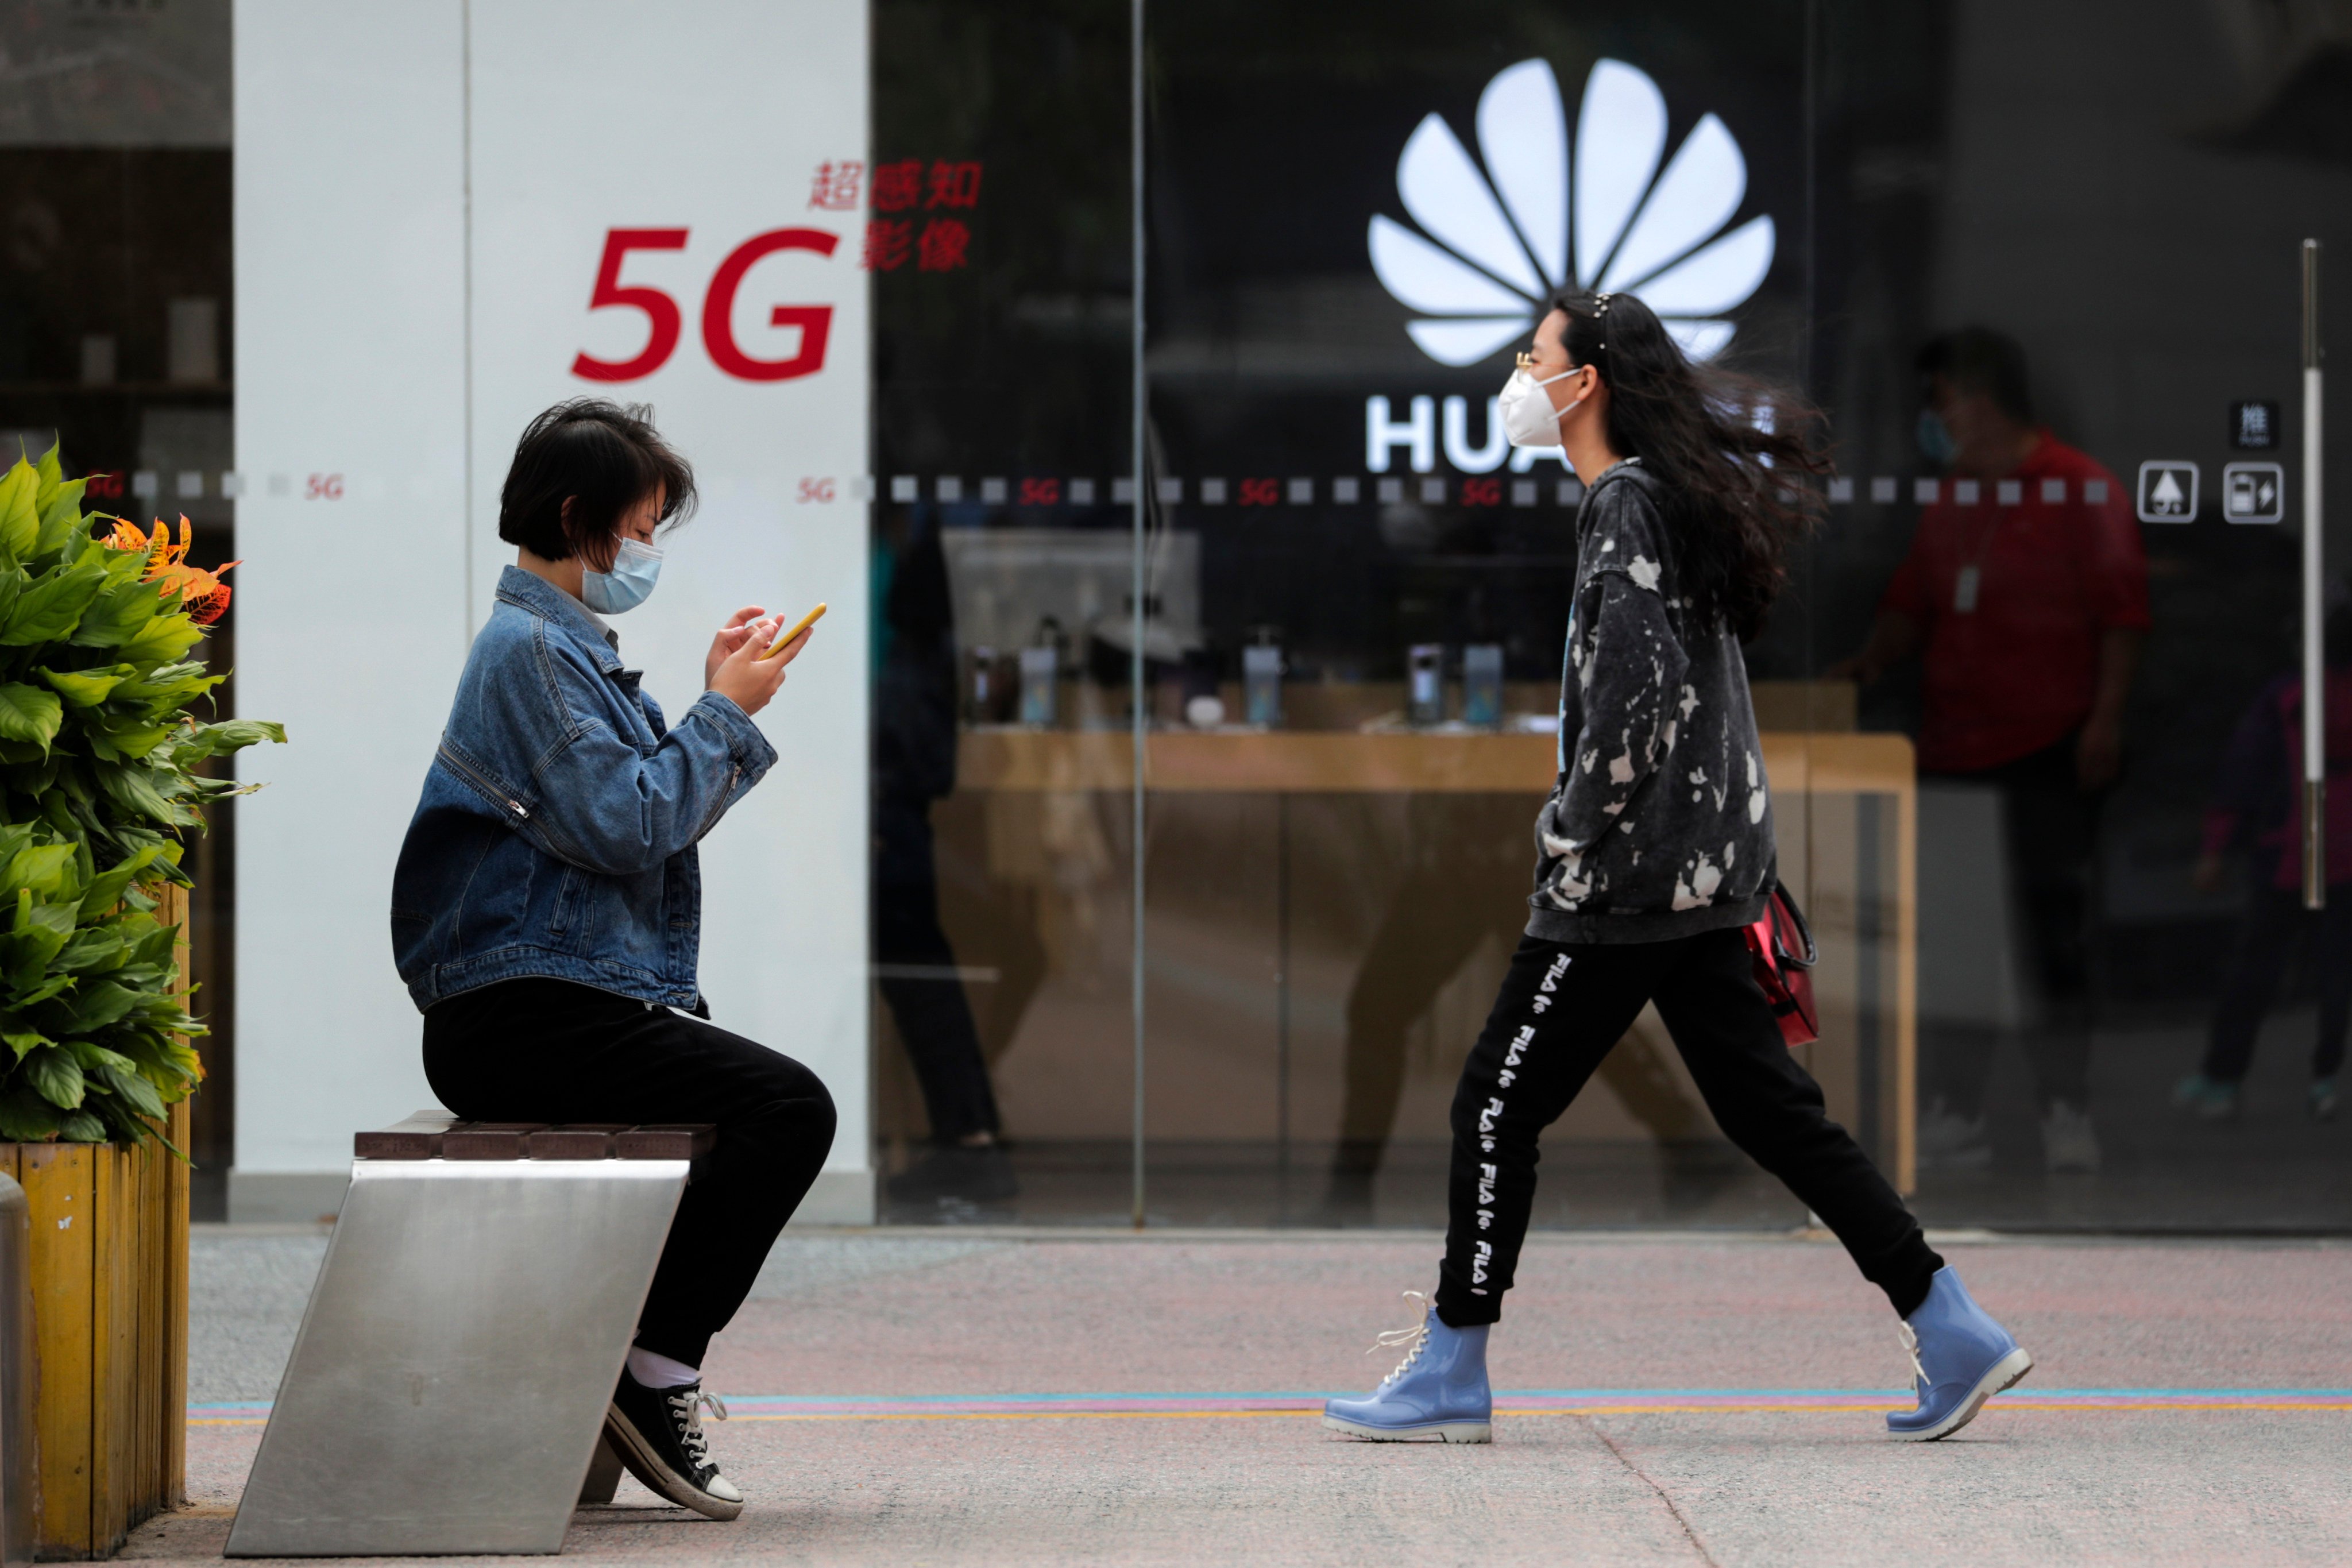 In this Oct. 11, 2020, file photo, a woman browses her smartphone as a woman walks by the Huawei retail shop promoting its 5G network in Beijing. Photo: AP